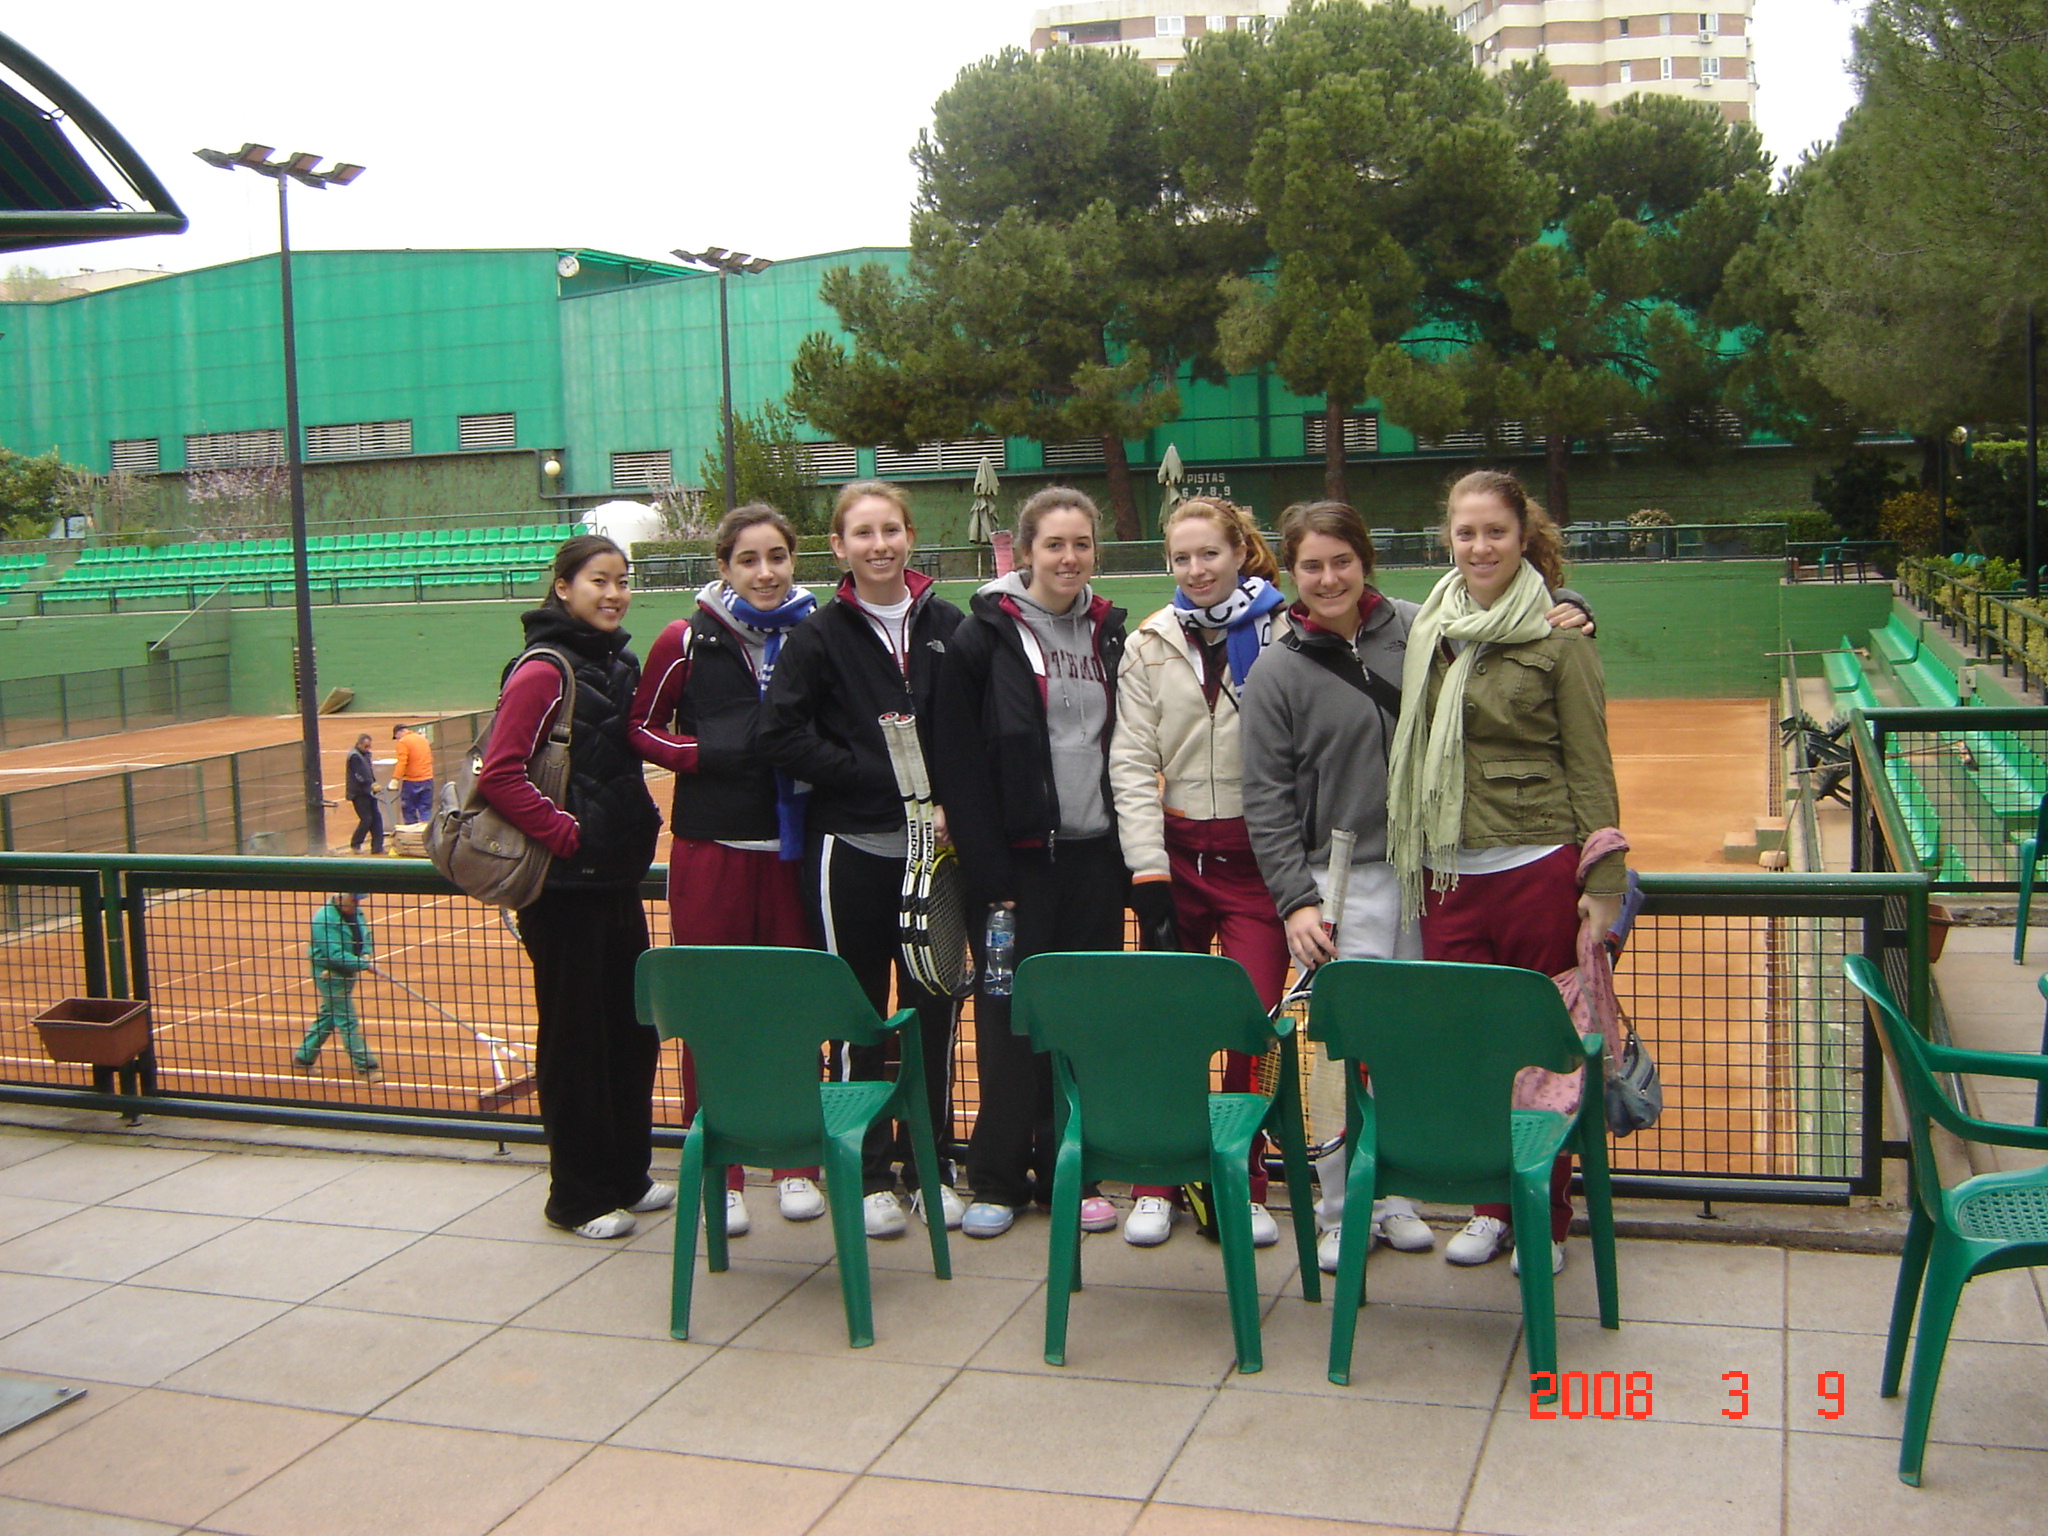 Team at Courts